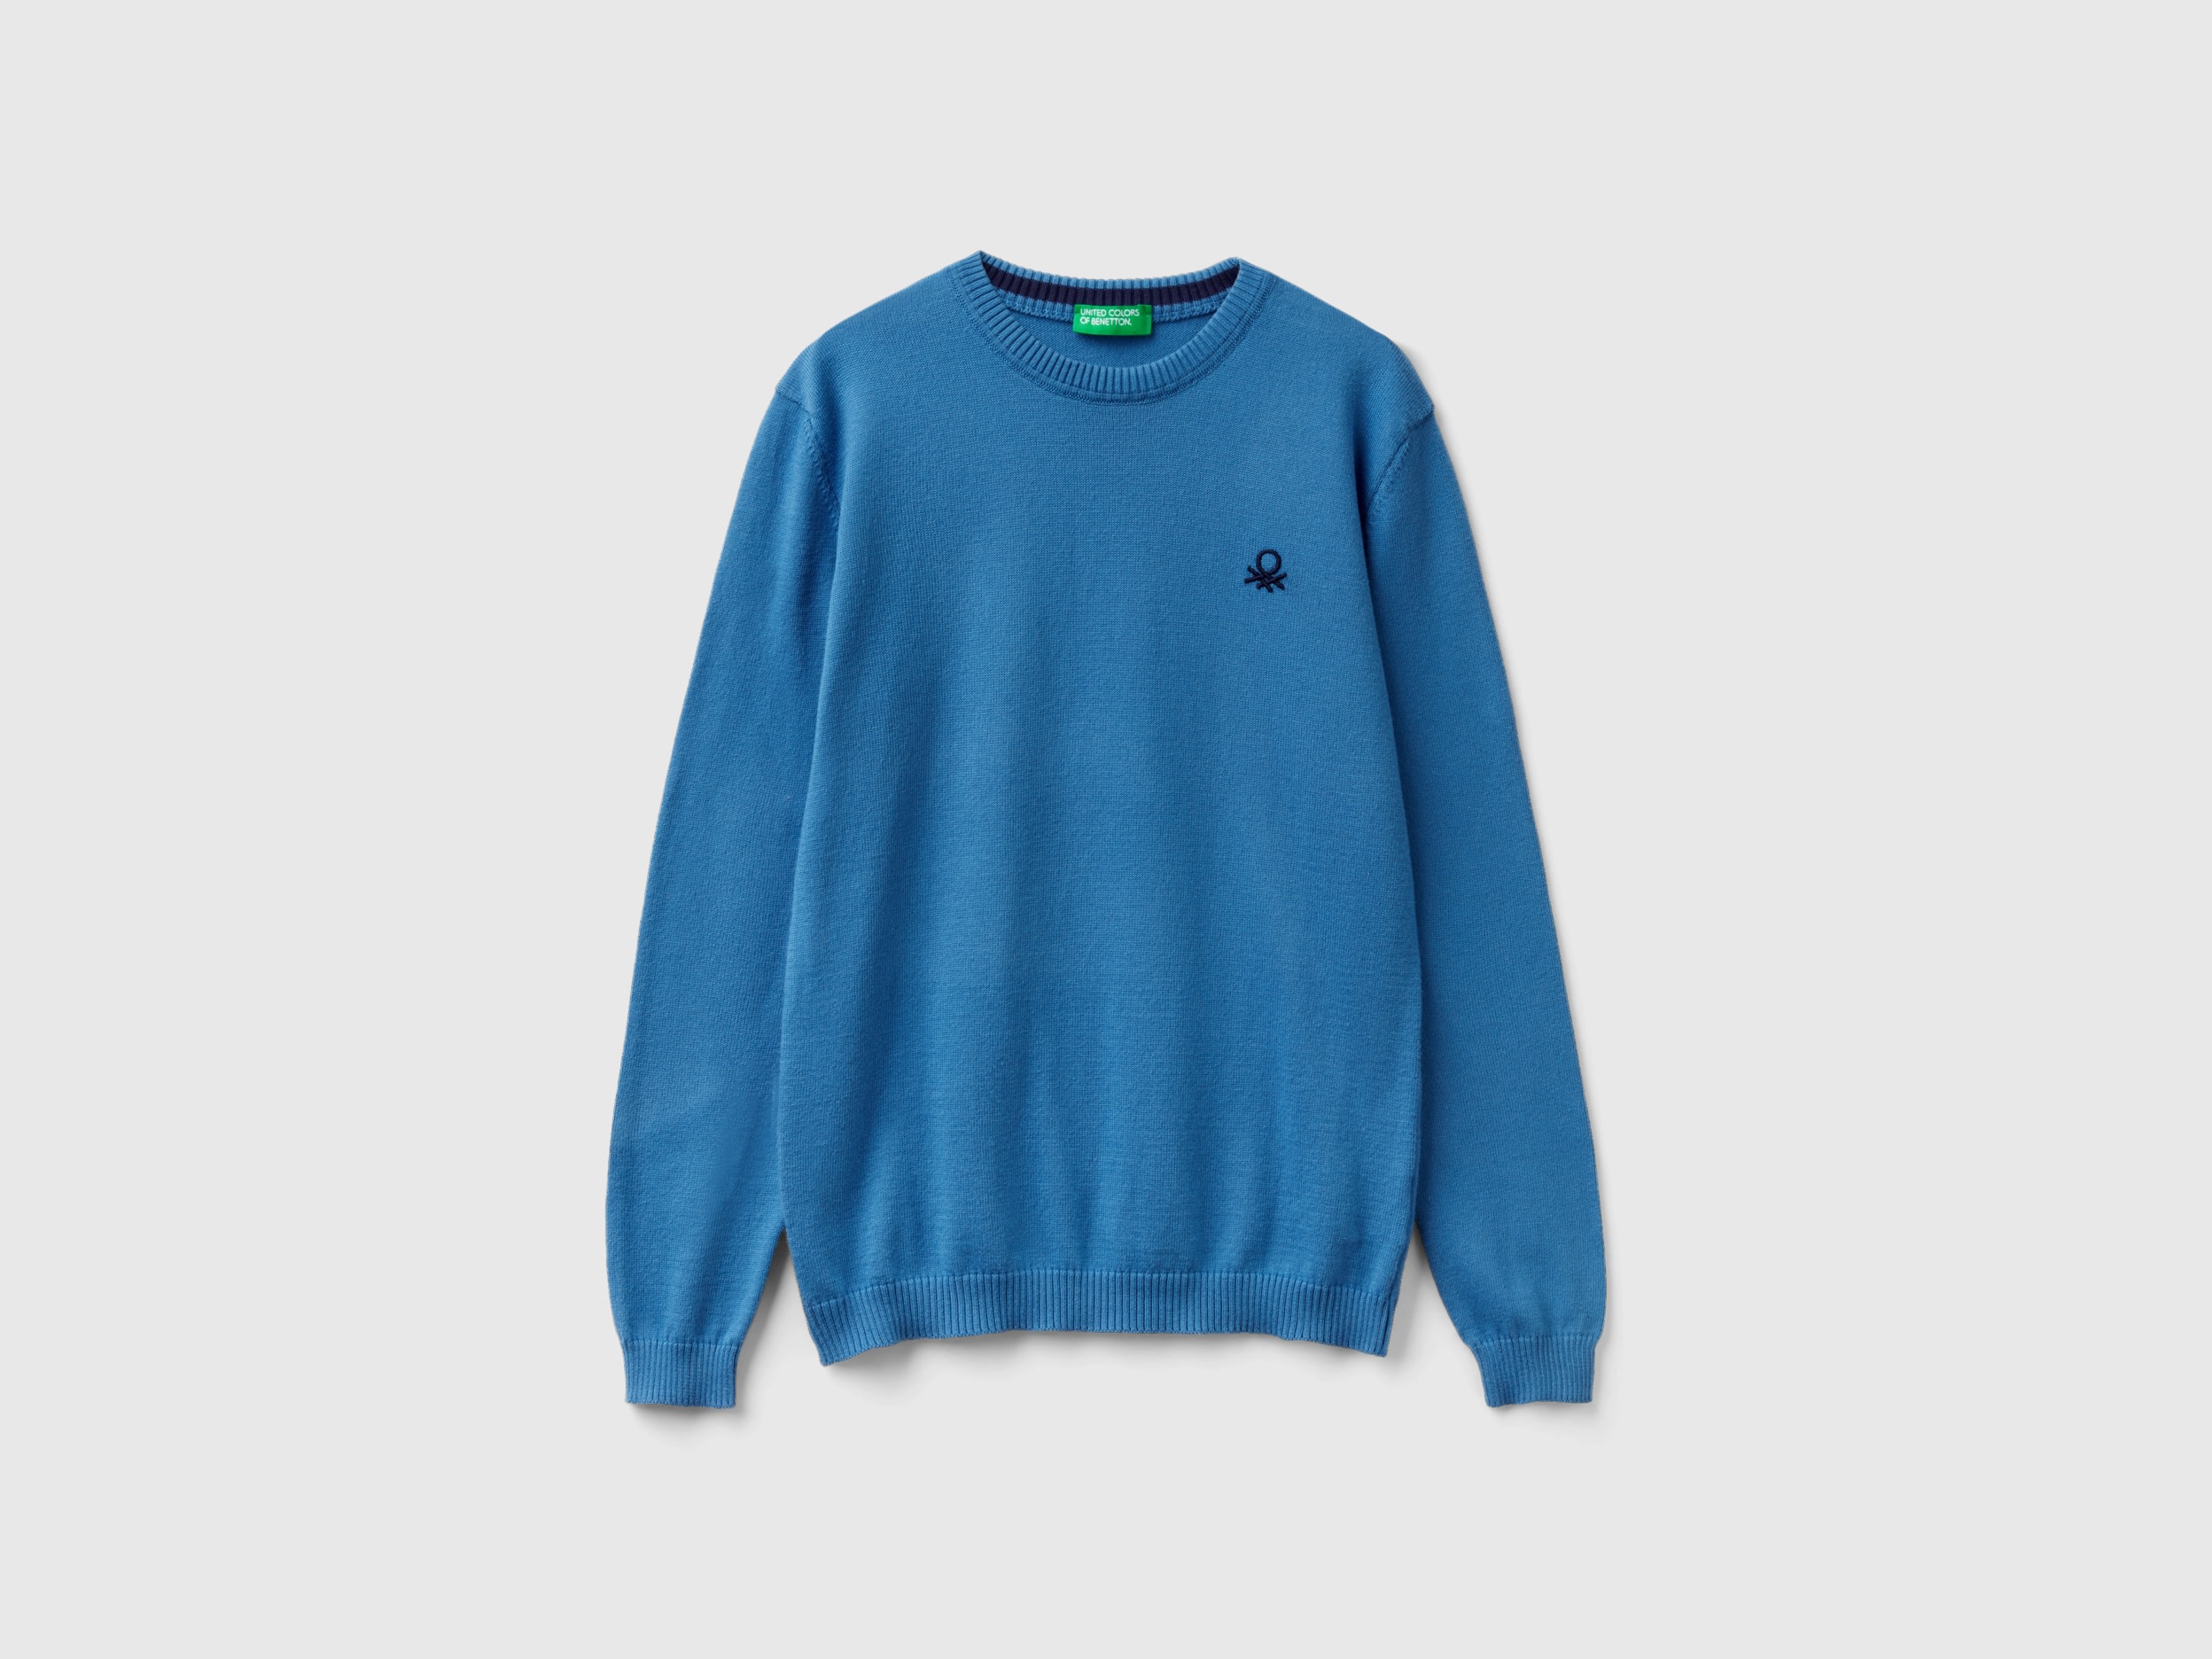 Benetton, Sweater In Pure Cotton With Logo, size L, Blue, Kids